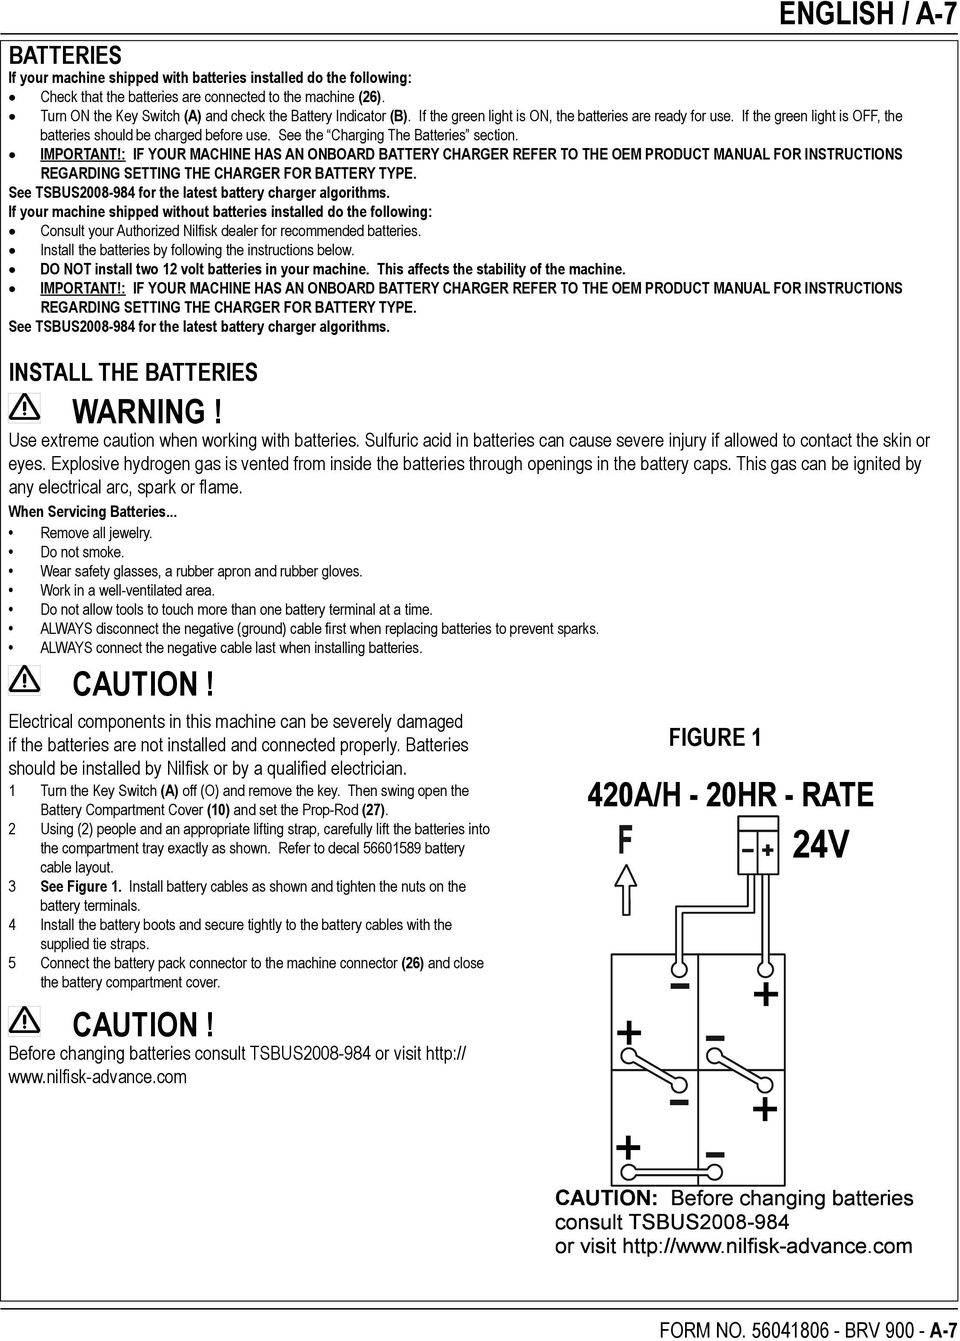 See the Charging The Batteries section. IMPORTANT!: IF YOUR MACHINE HAS AN ONBOARD BATTERY CHARGER REFER TO THE OEM PRODUCT MANUAL FOR INSTRUCTIONS REGARDING SETTING THE CHARGER FOR BATTERY TYPE.